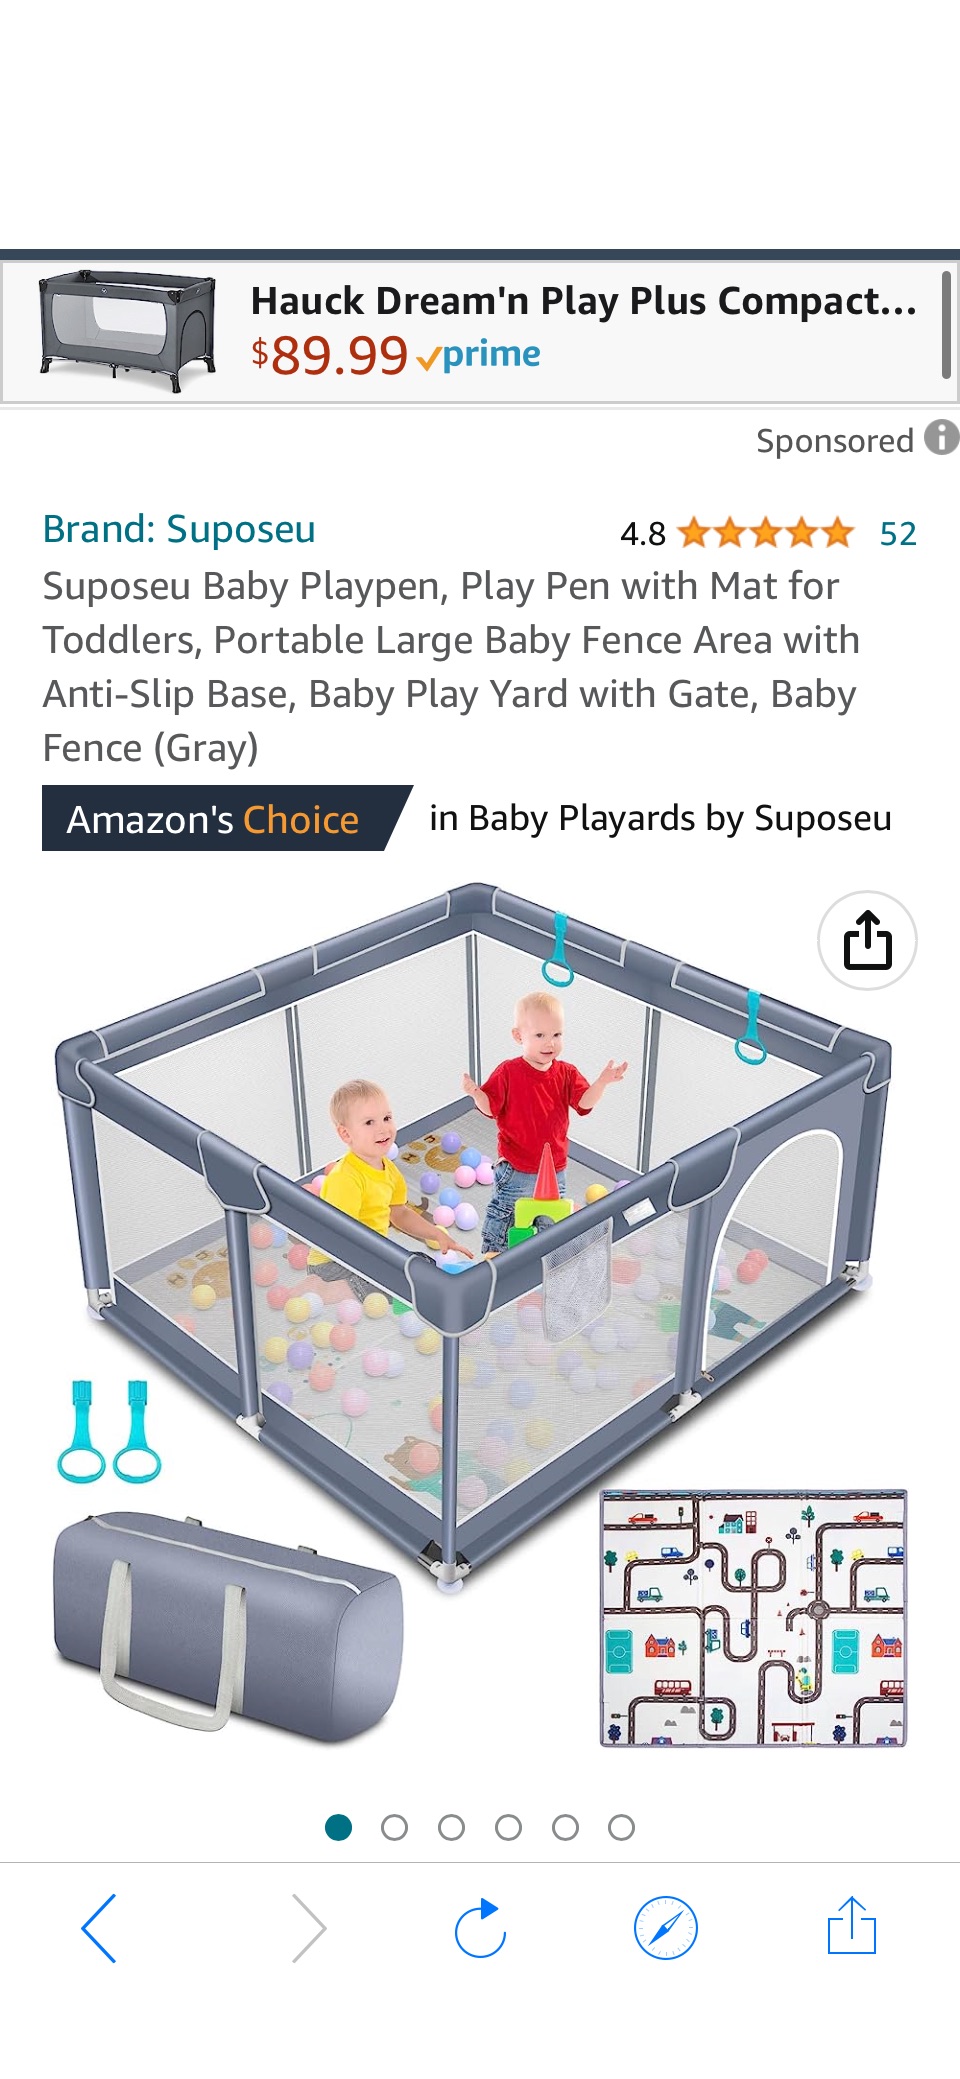 Amazon.com : Suposeu Baby Playpen, Play Pen with Mat for Toddlers, Portable Large Baby Fence Area with Anti-Slip Base, Baby Play Yard with原价459.99